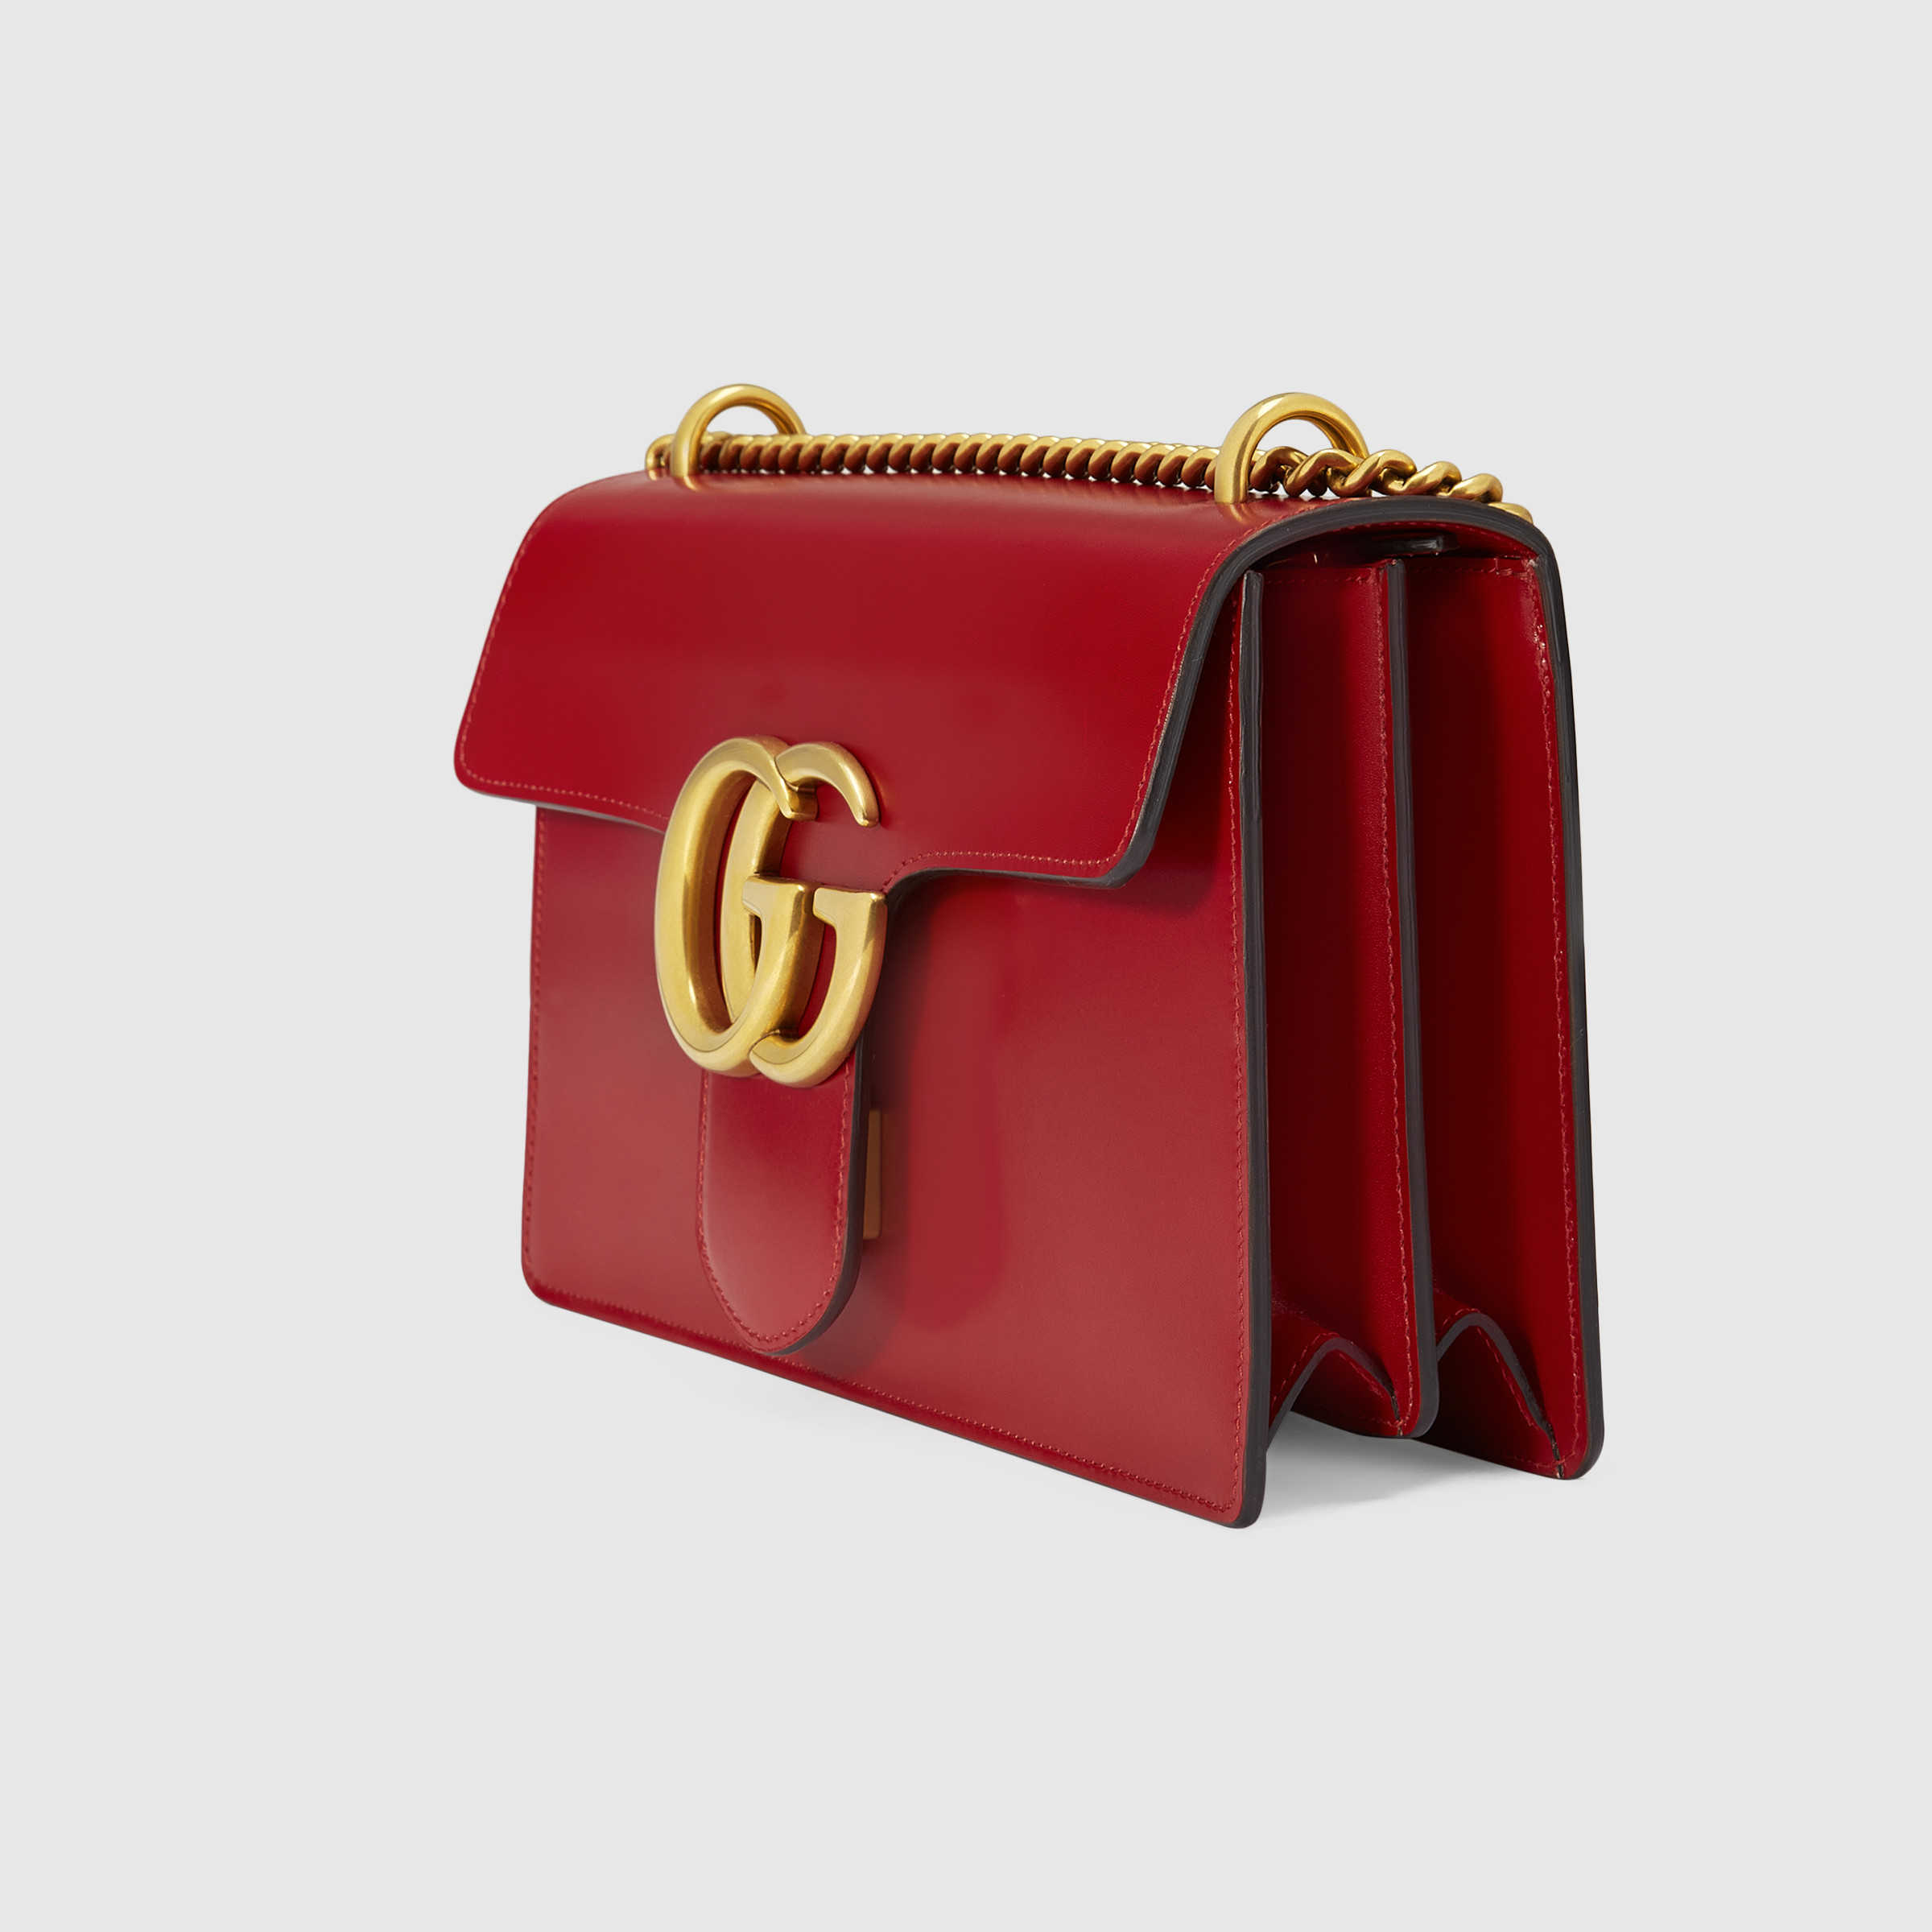 Lyst - Gucci GG Marmont Leather Shoulder Bag in Red